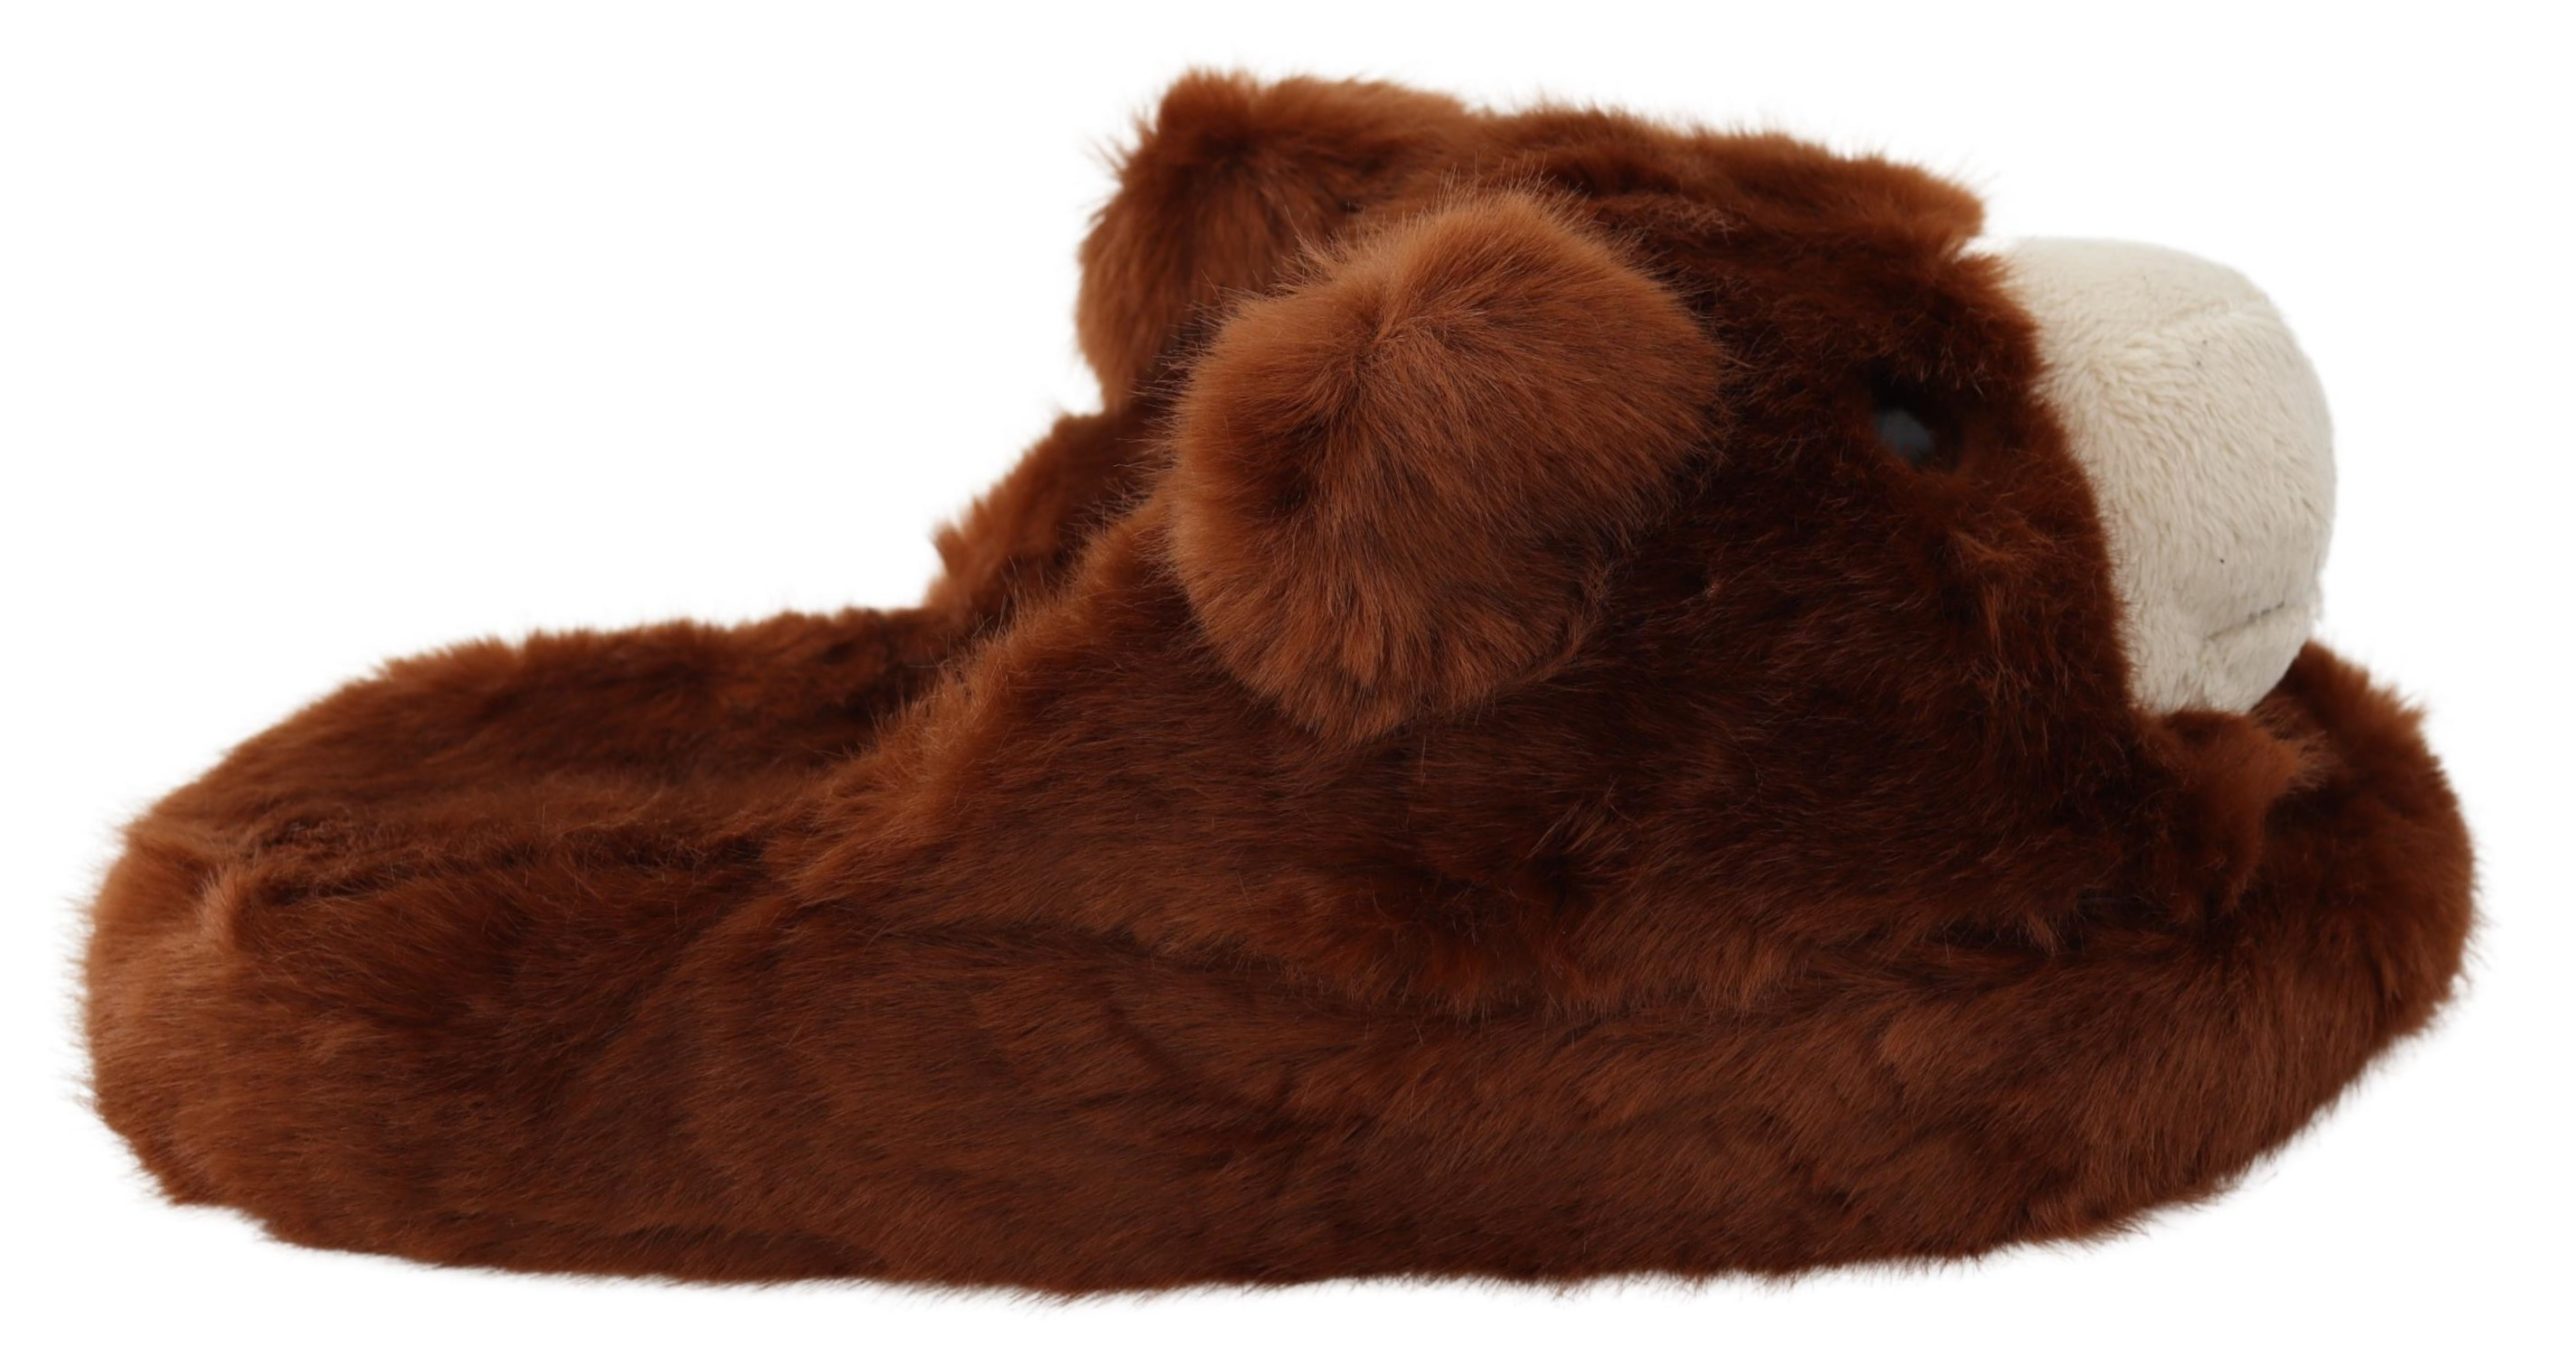 Brown Dolce & Gabbana Brown Teddy Bear Slippers Sandals Shoes